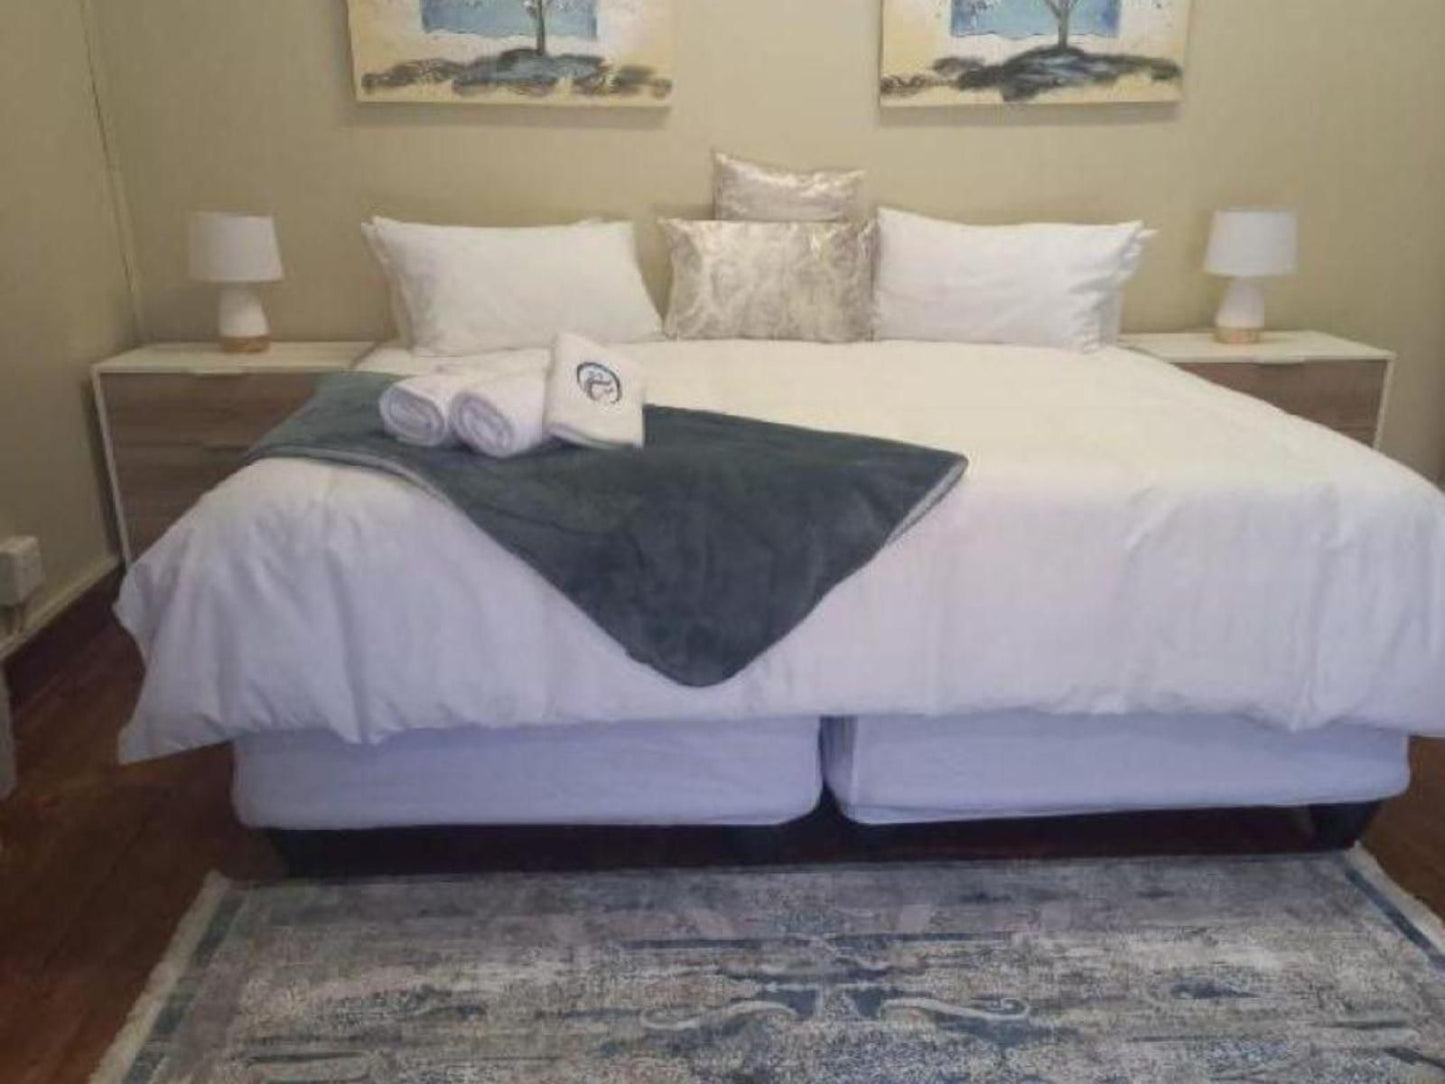 St Eve Lodge And Spa Waverley Bloemfontein Free State South Africa Bedroom